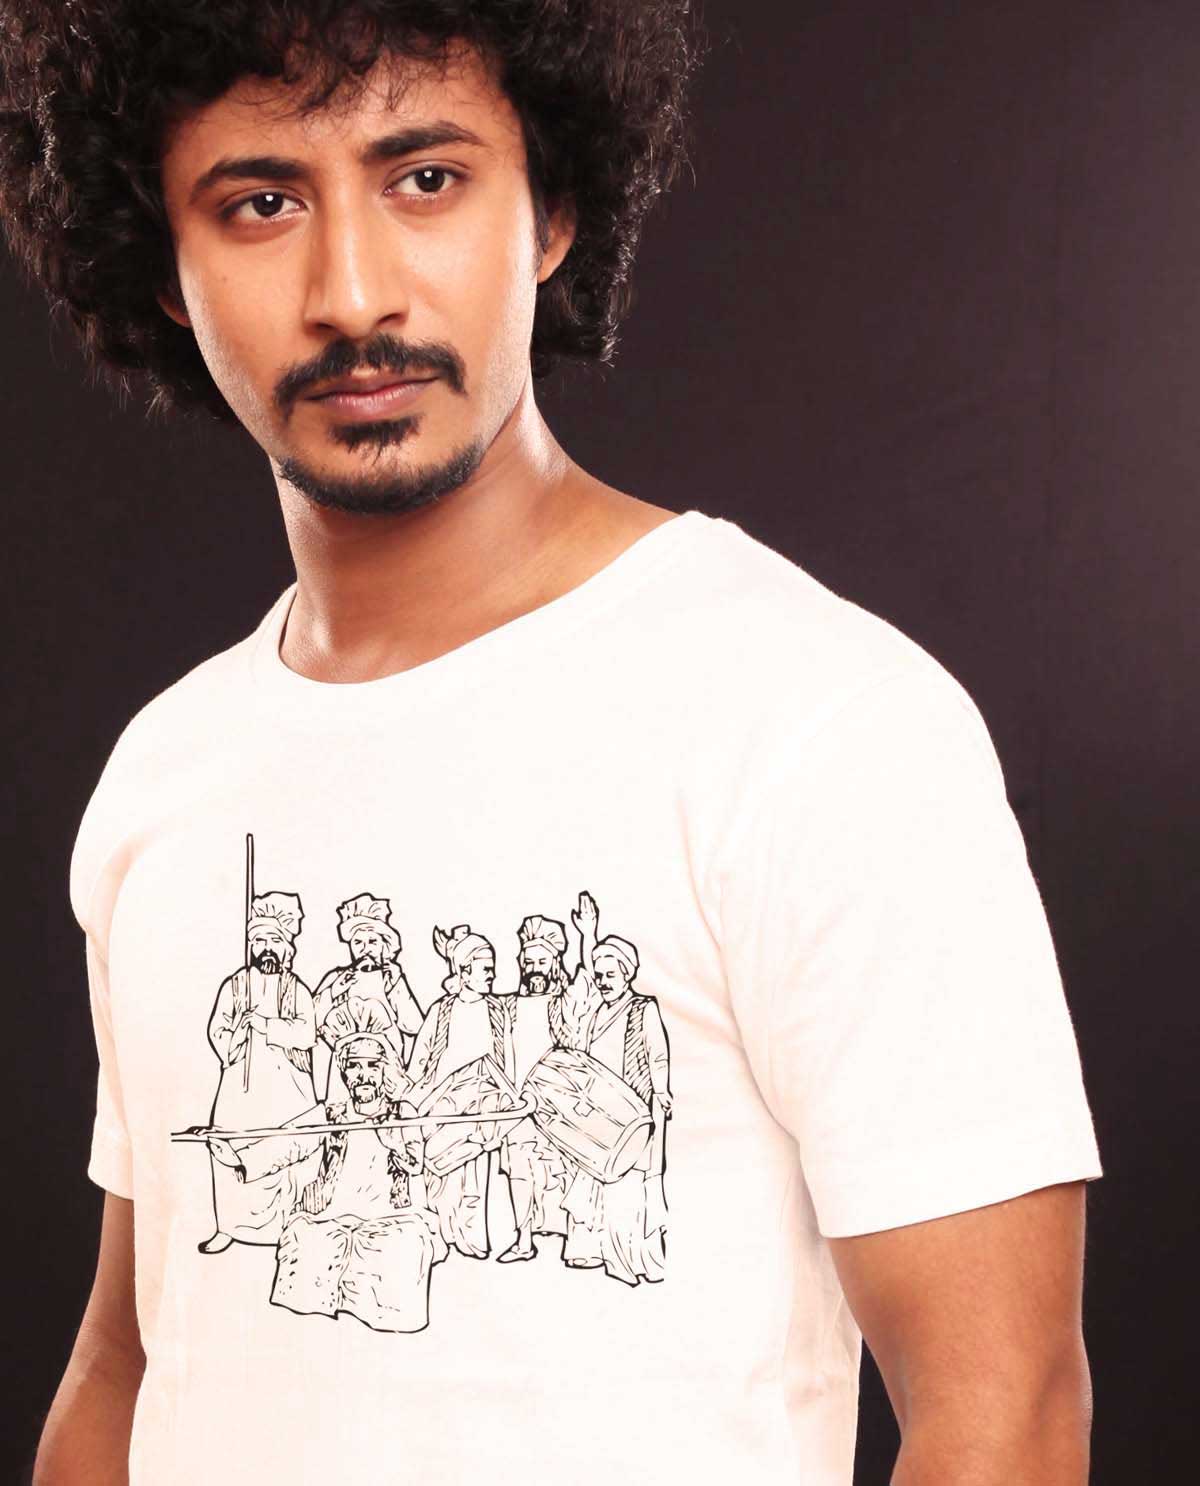 South Asian Male Model Wearing Gildan Ultra Cotton Tshirt with graphic design image of bhagara dancers.